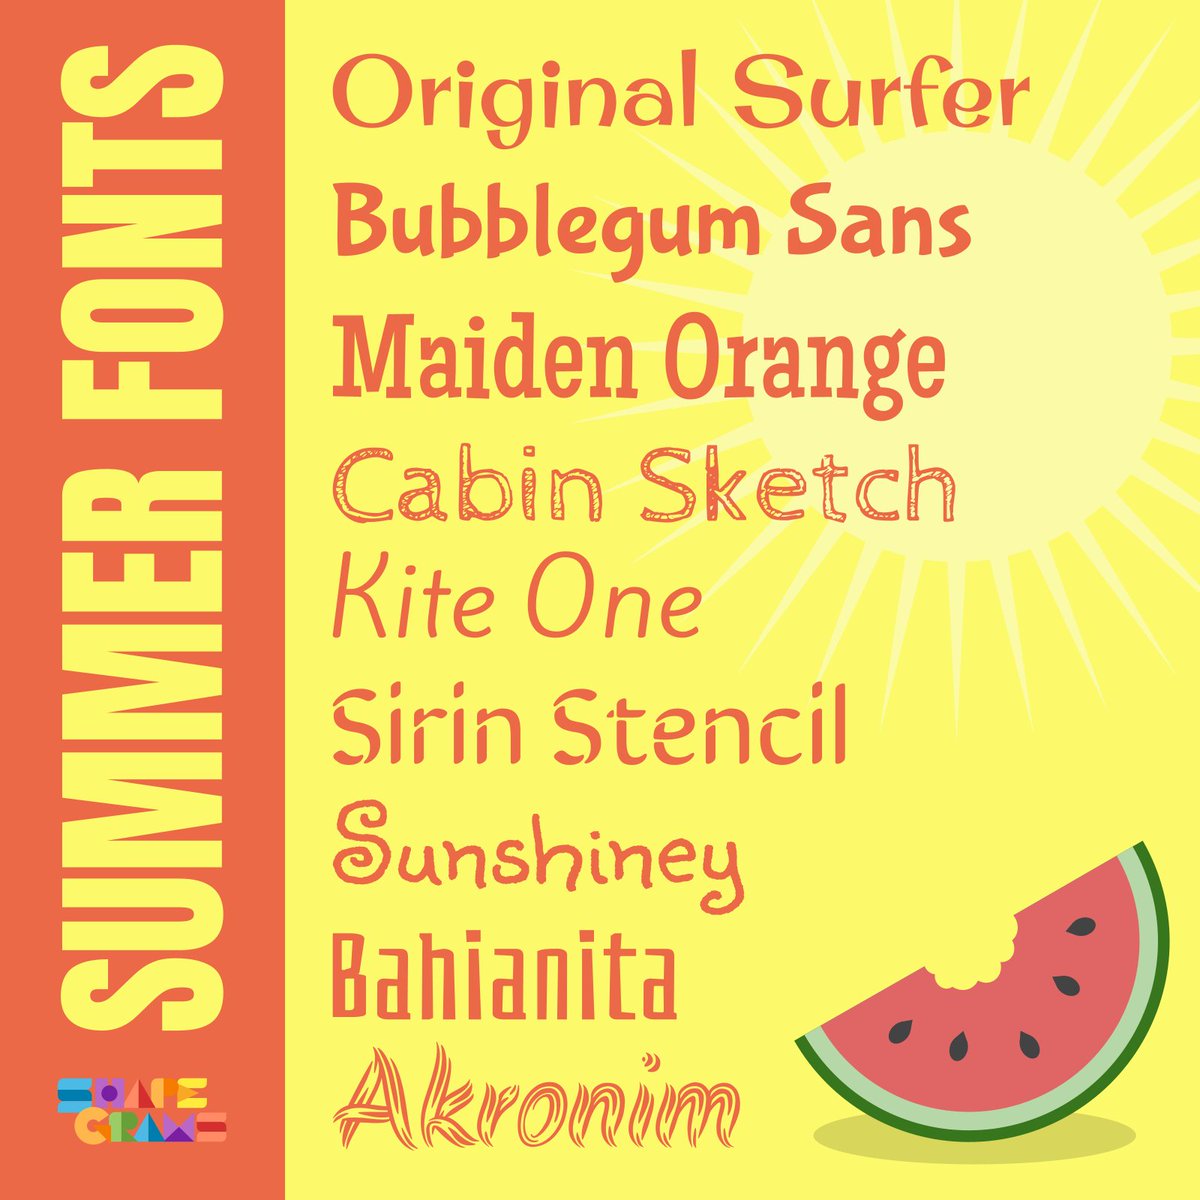 Add summer vibes with these fonts—available for free in Google Workspace and downloadable at fonts.google.com.

#GoogleEdu #EdTech #Teachers #TeacherTwitter